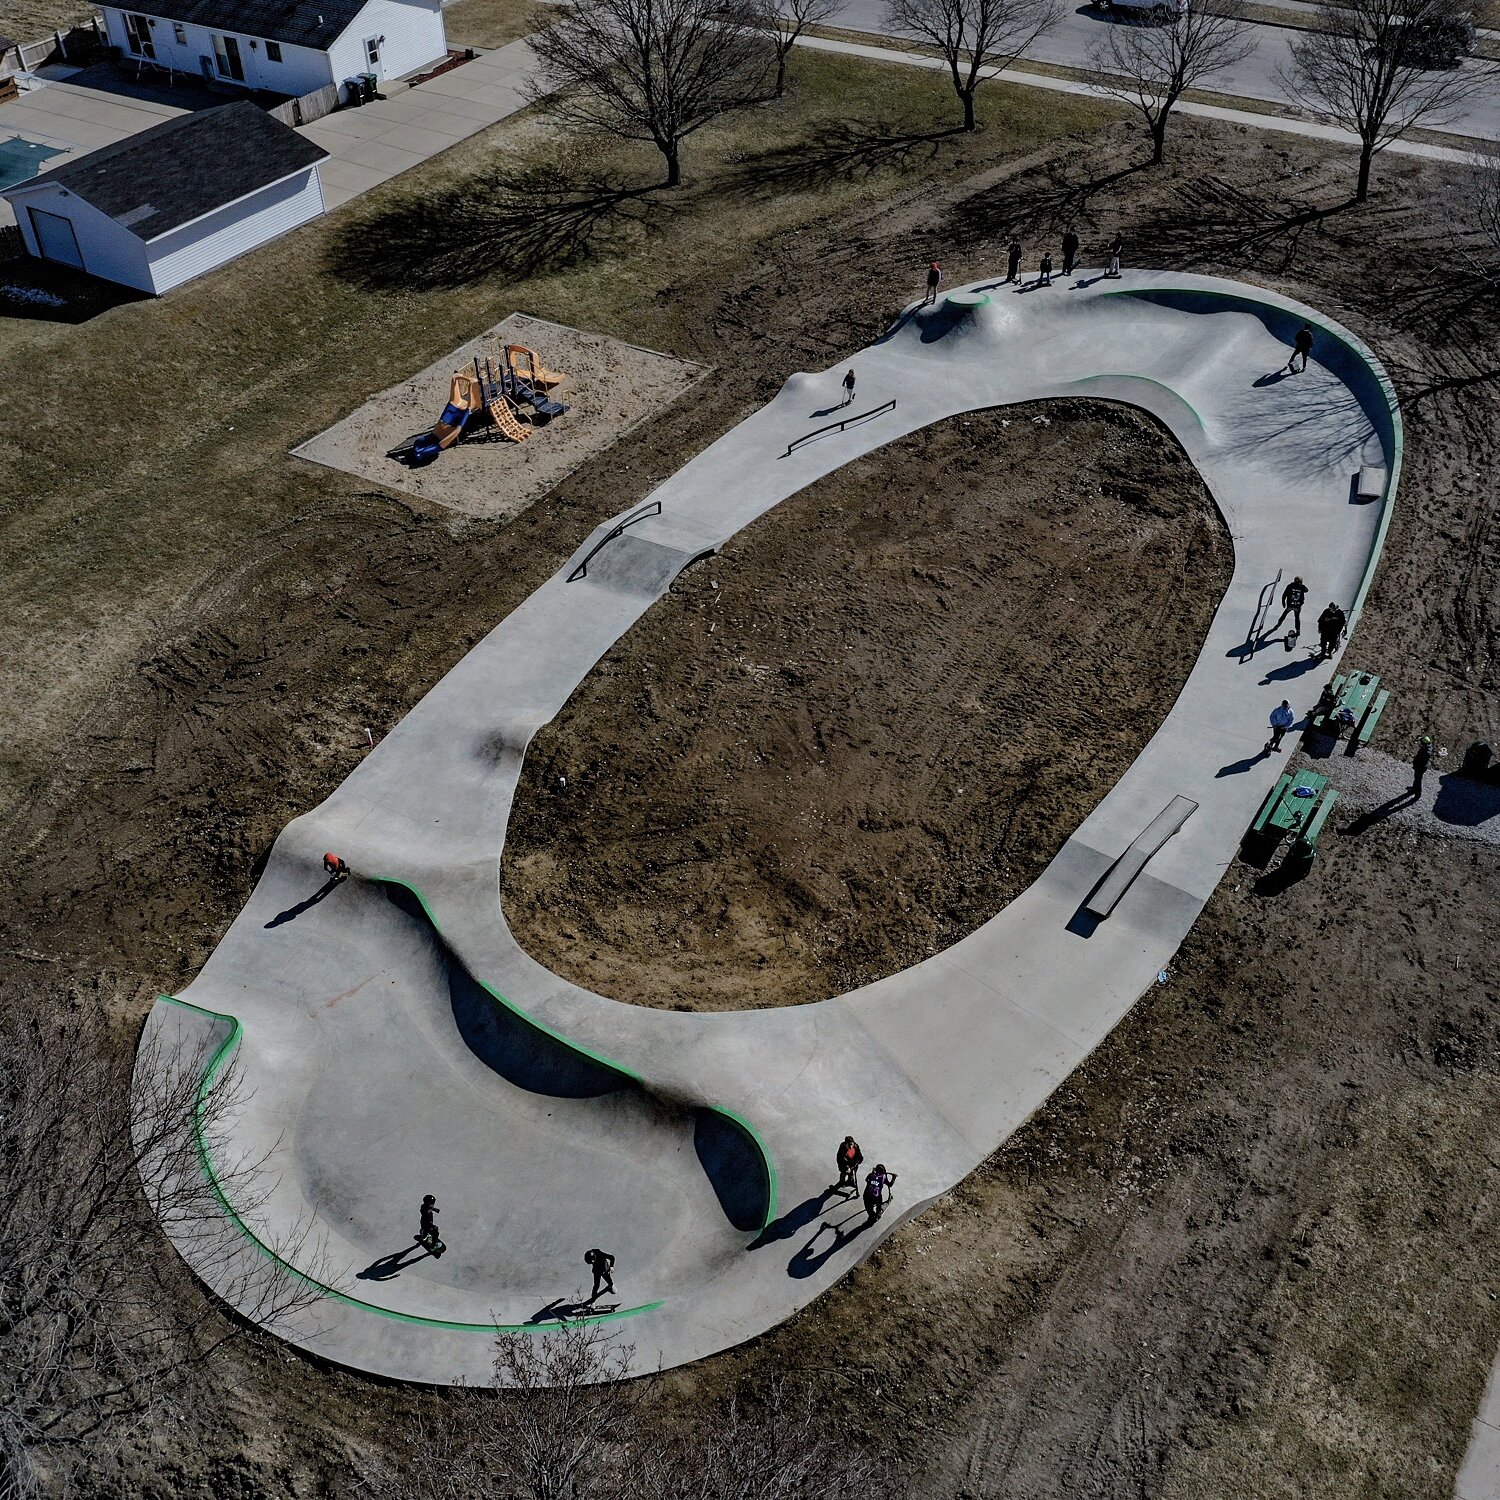 Skate around the Sturtevant, Wisconsin #skatepath 🏁 a good mix of transition &amp; street terrain with great flow 💯check yesterday’s video for action shots 💥